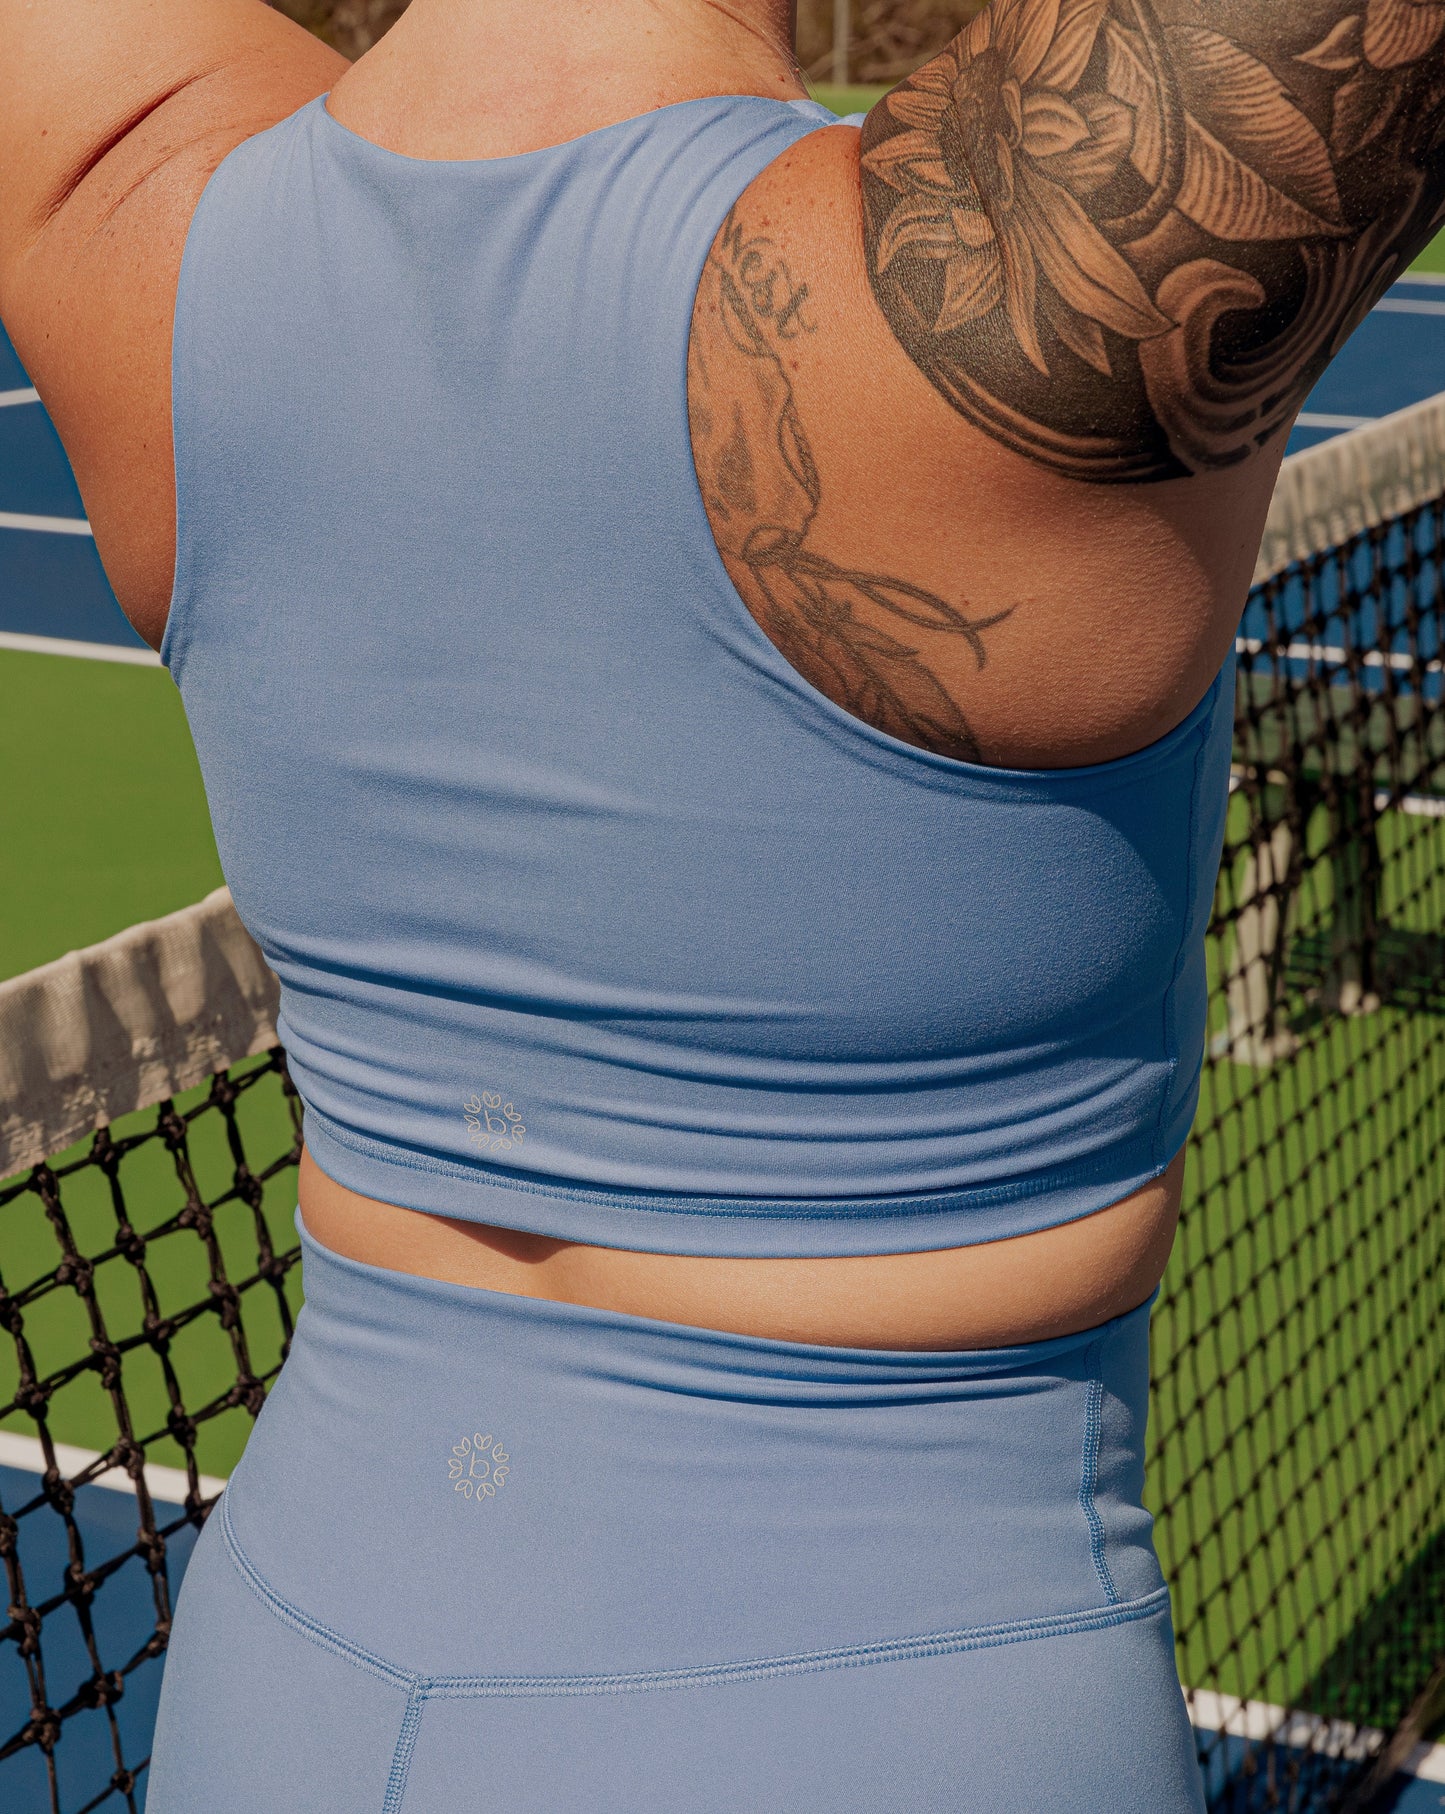 The back side of a women with tatooes on her left arm. She is wearing a matching tank top and biker short set.  She is facing away from the camera and is standing on a tennis court.